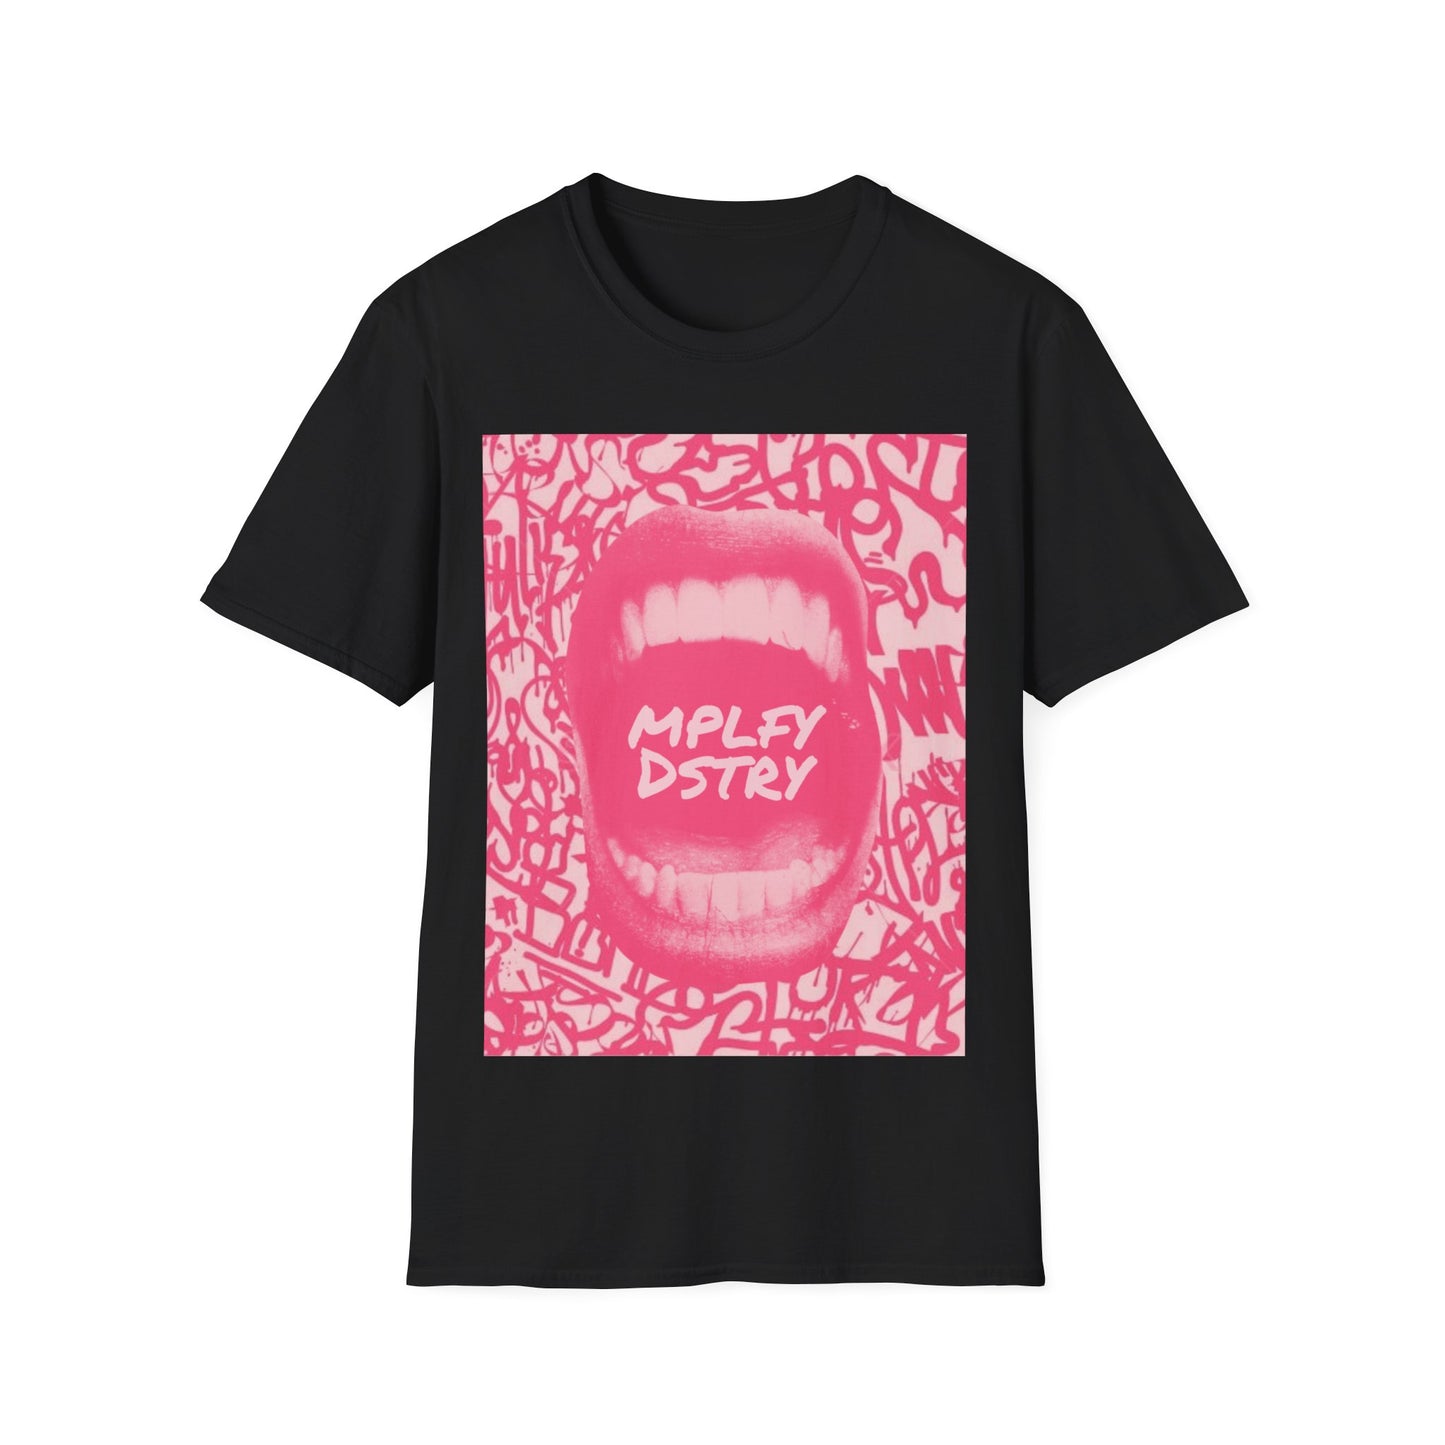 BIG MOUTH Classic Fit AmplifyDestroy Print Tee Shirt